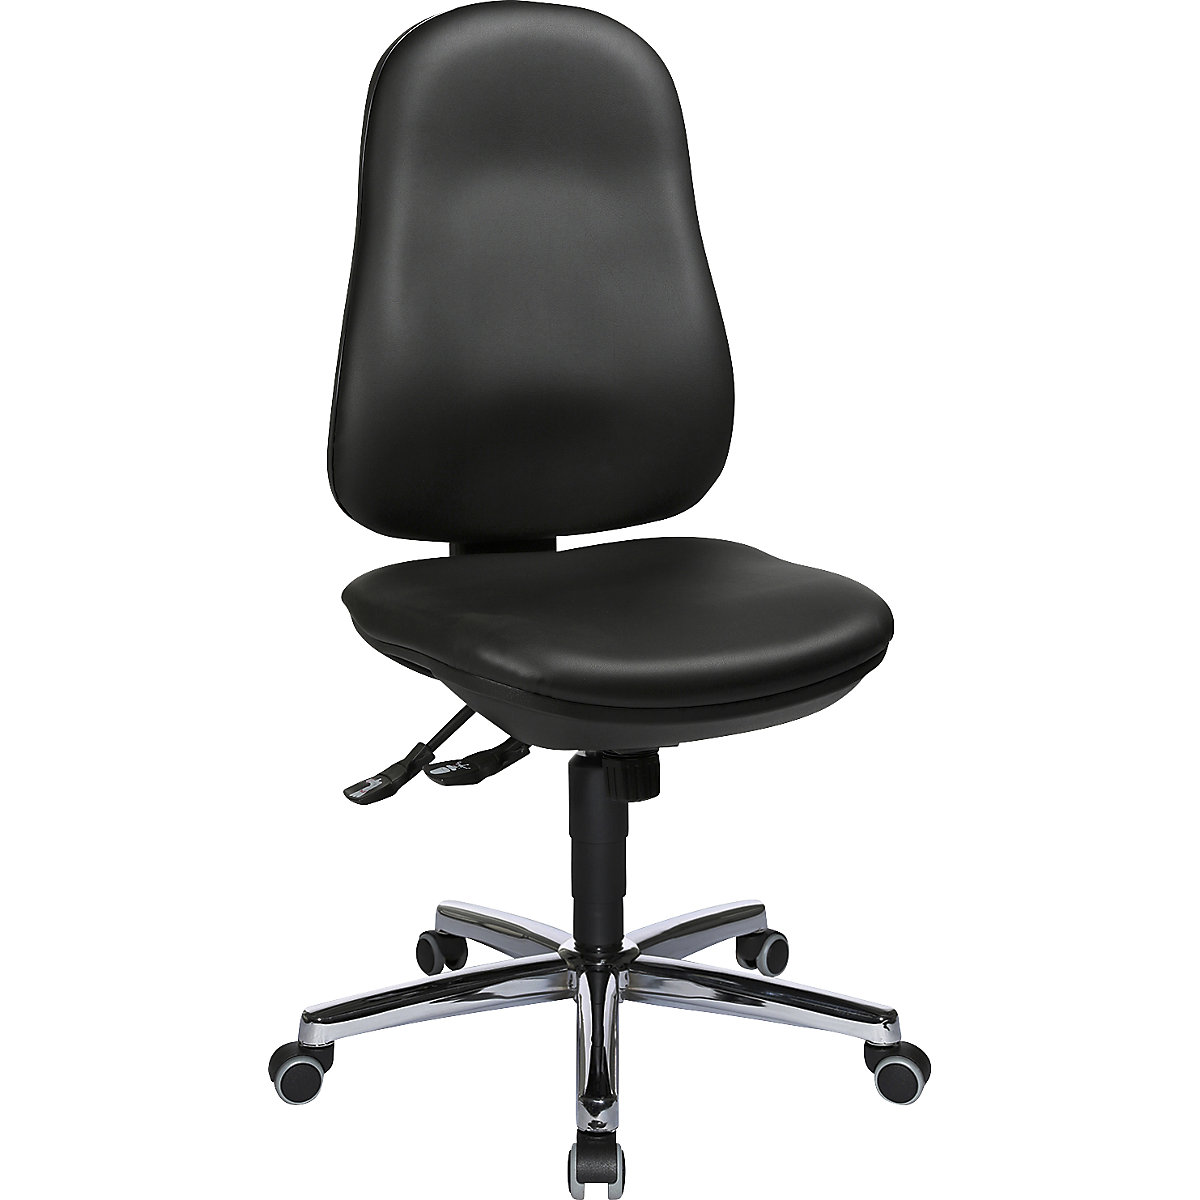 SUPPORT SY swivel chair – Topstar, vinyl cover, black-7